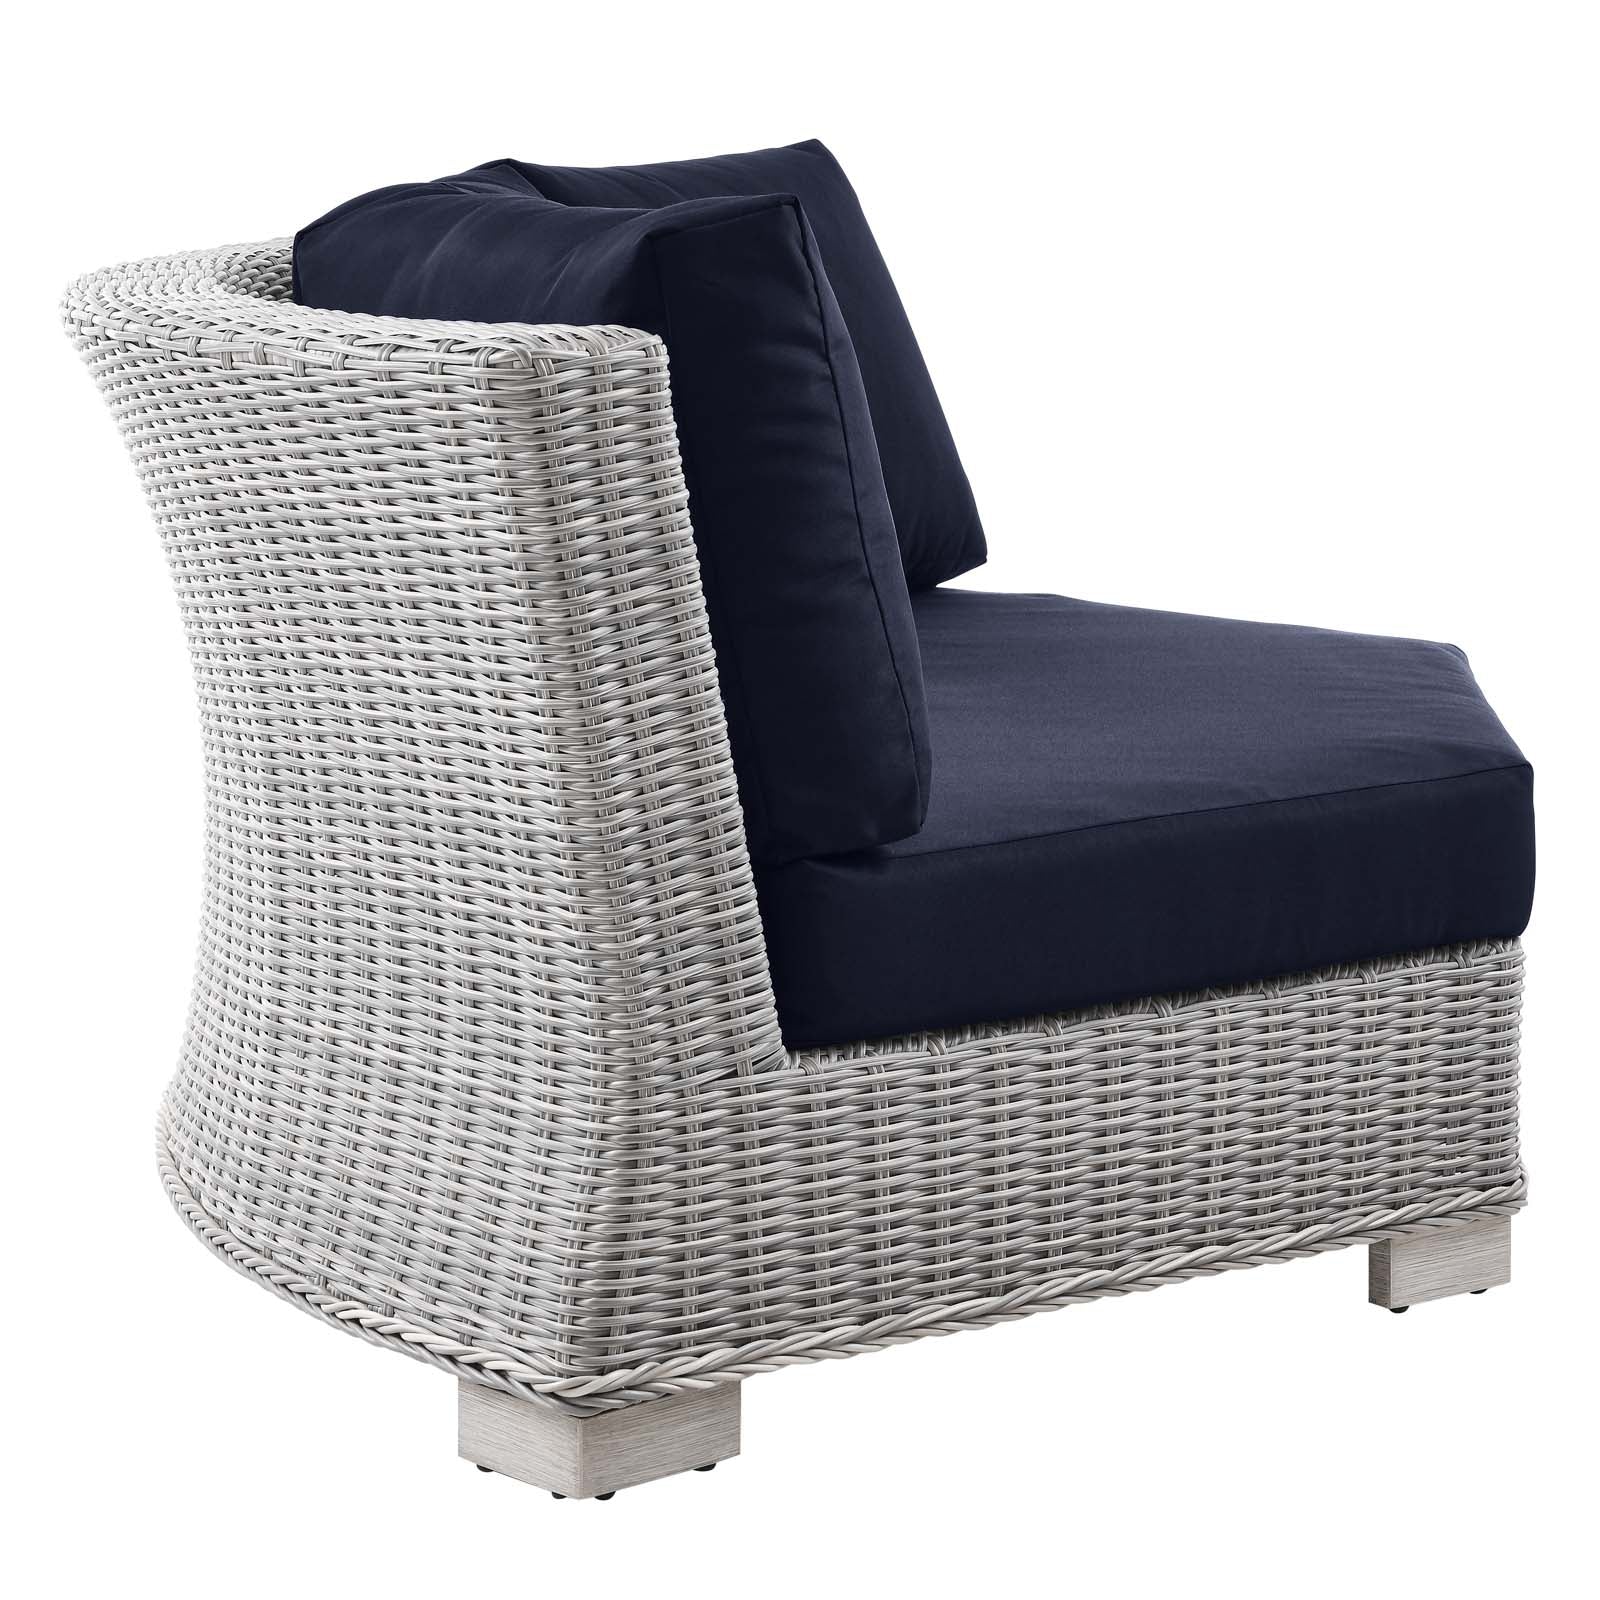 Conway Outdoor Patio Wicker Rattan Round Corner Chair - East Shore Modern Home Furnishings